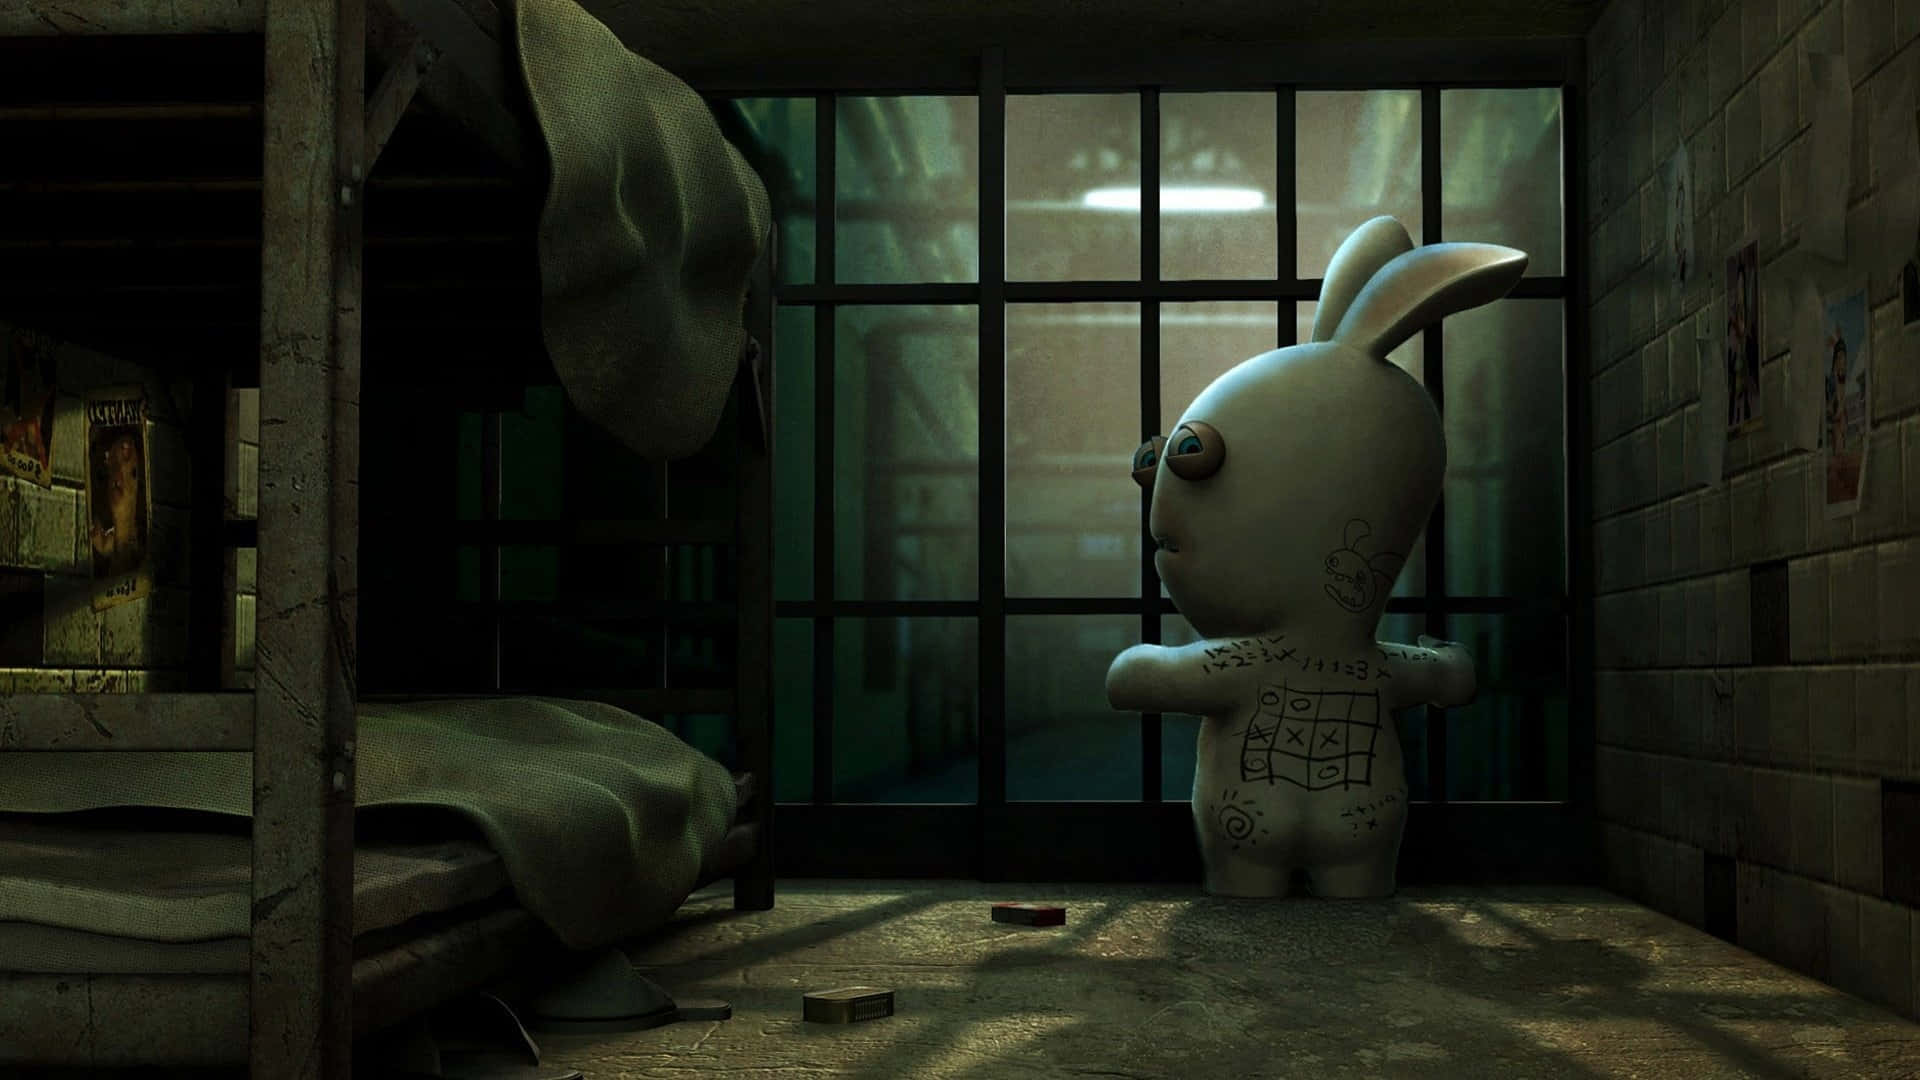 A Rabbit In A Prison Cell